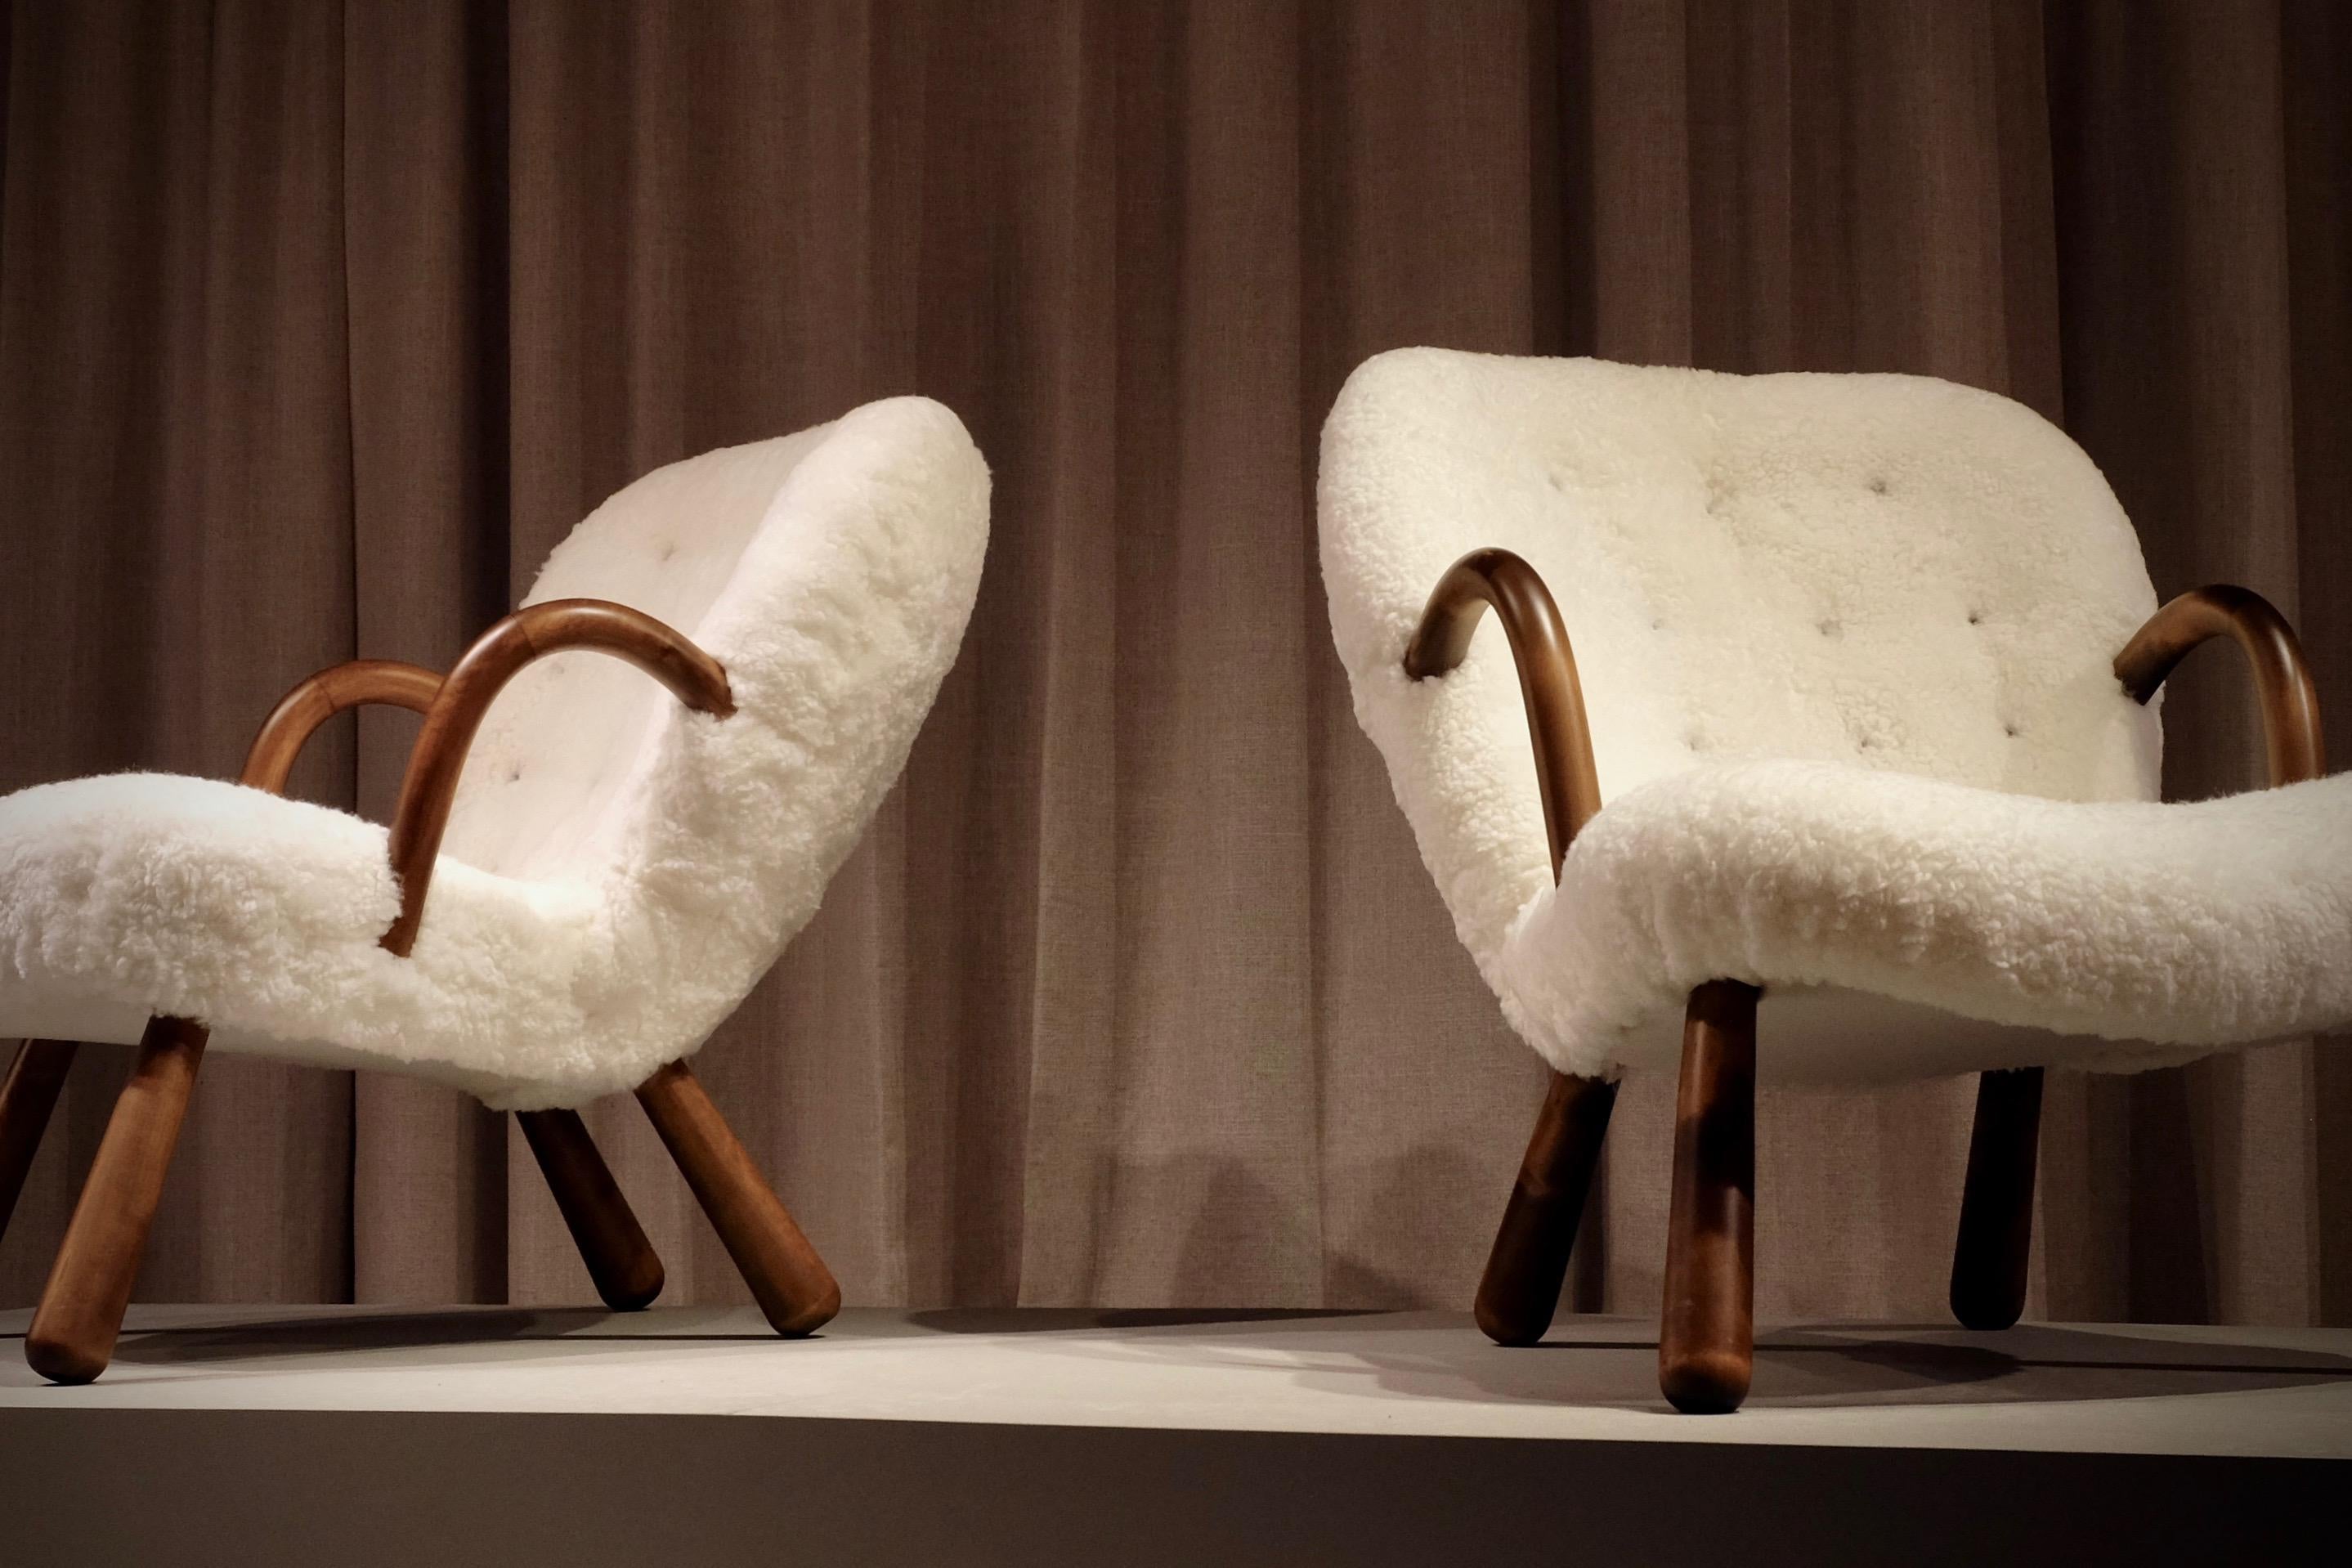 Philip Arctander clam chairs by Nordisk Stål & Møbel Central in Denmark, 1940s.
Completely restored. Excellent condition.